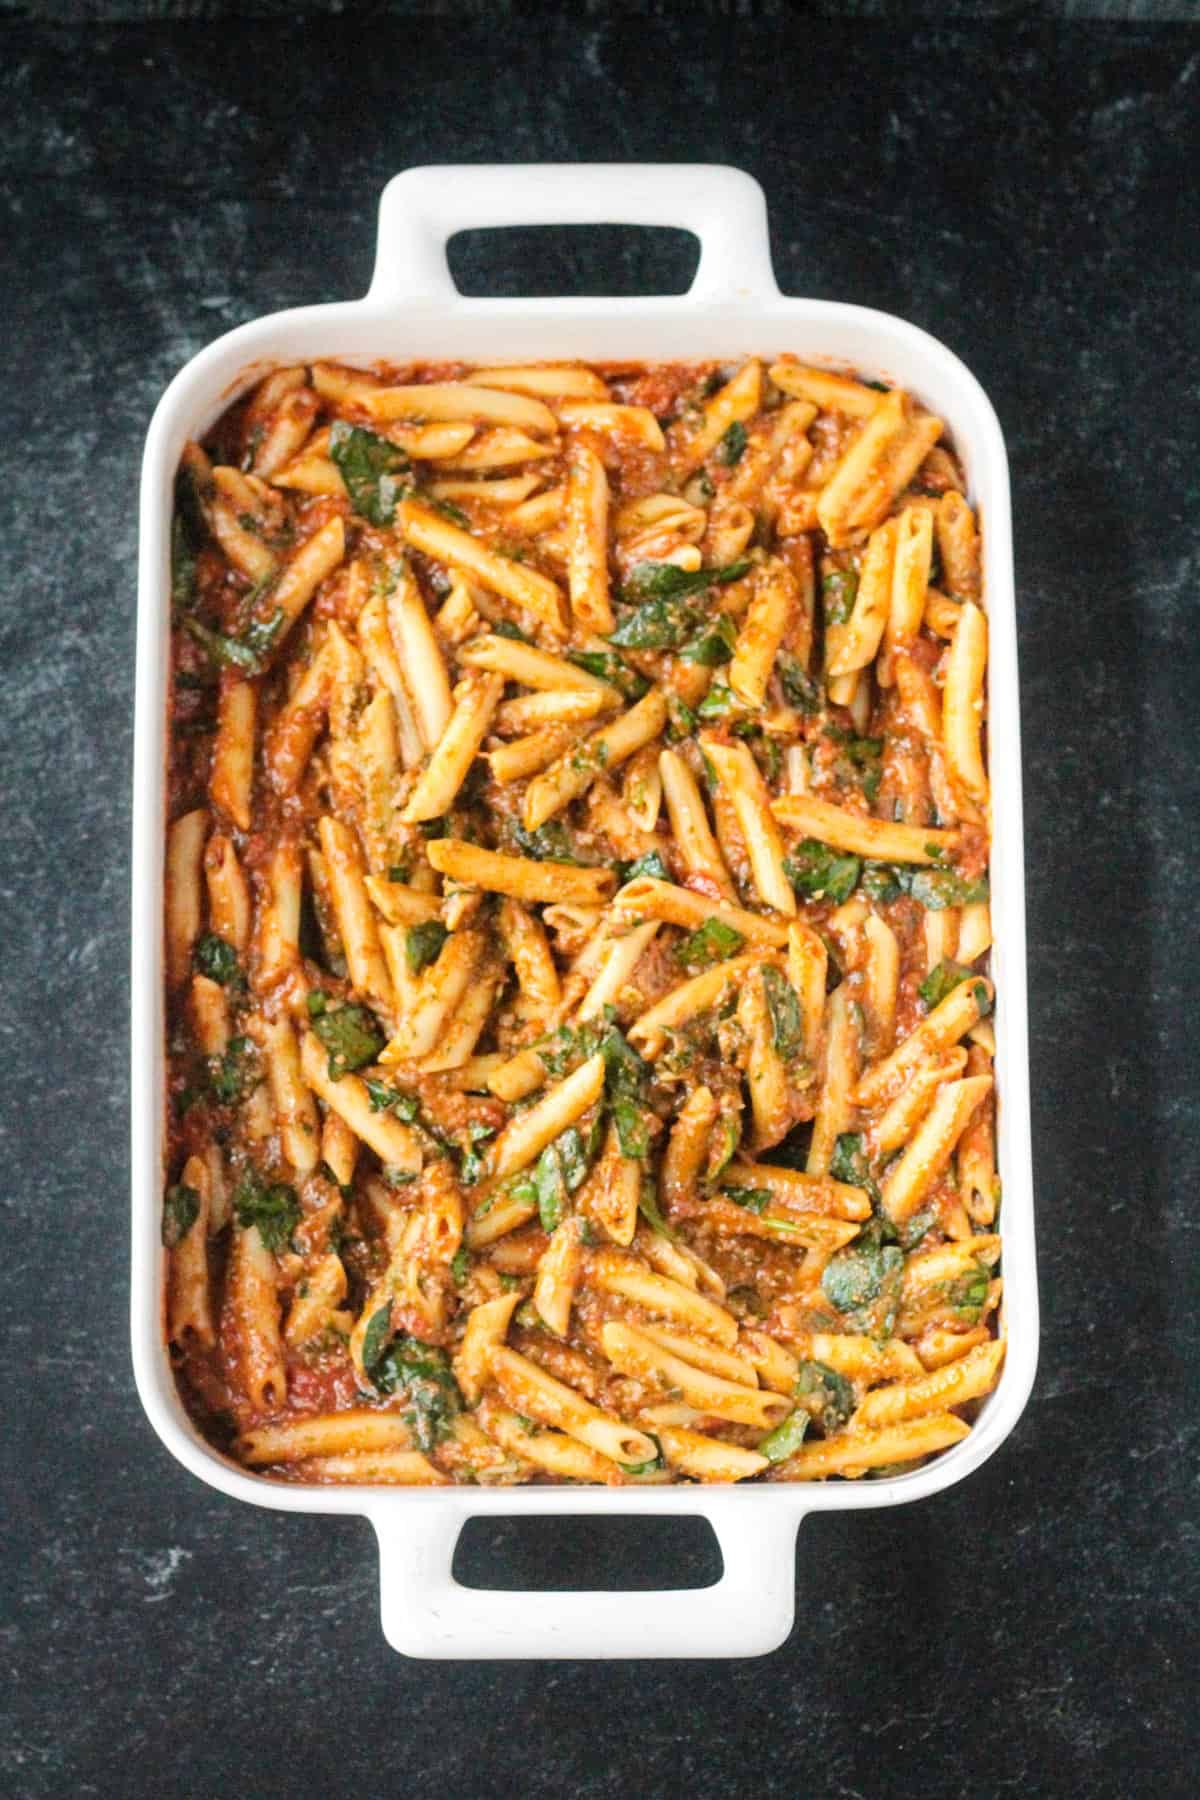 Penne pasta mixed with pesto, spinach, and tomato sauce in a casserole dish.